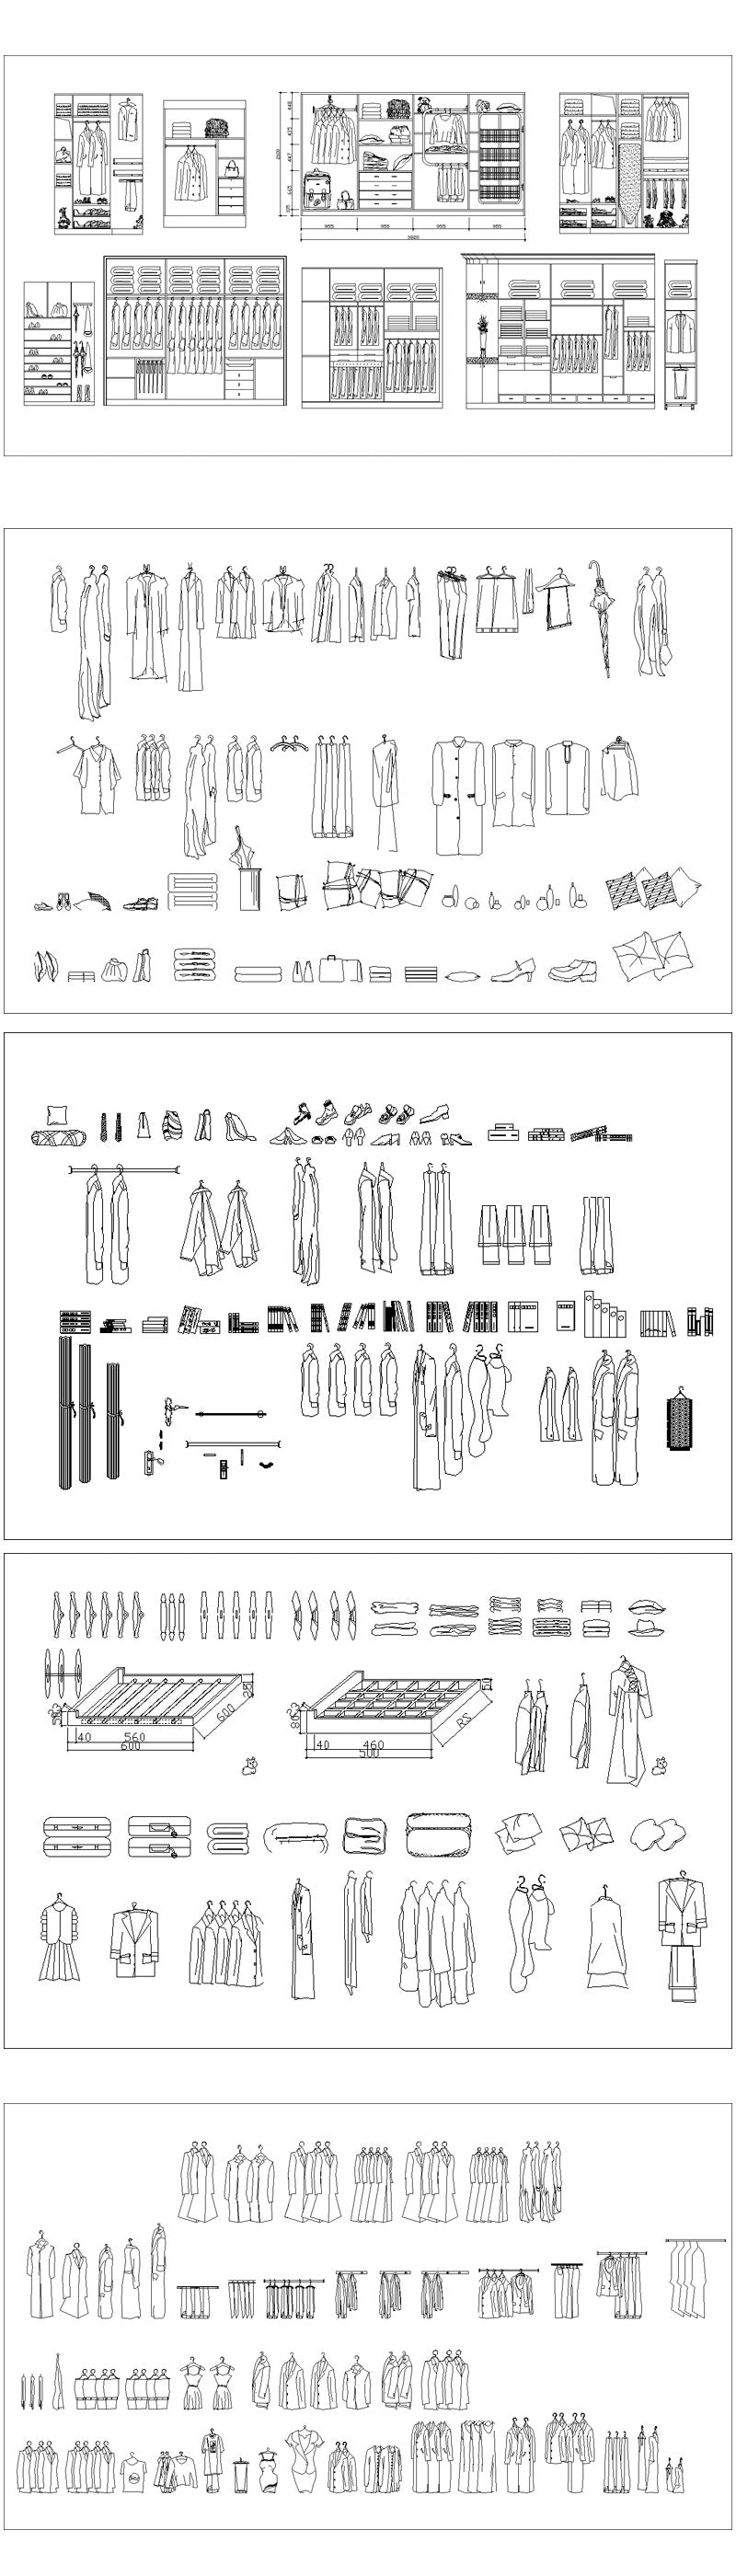 ☆【Clothes,Shoes,Hats,Wardrobe Accessories Autocad Blocks Collections】A